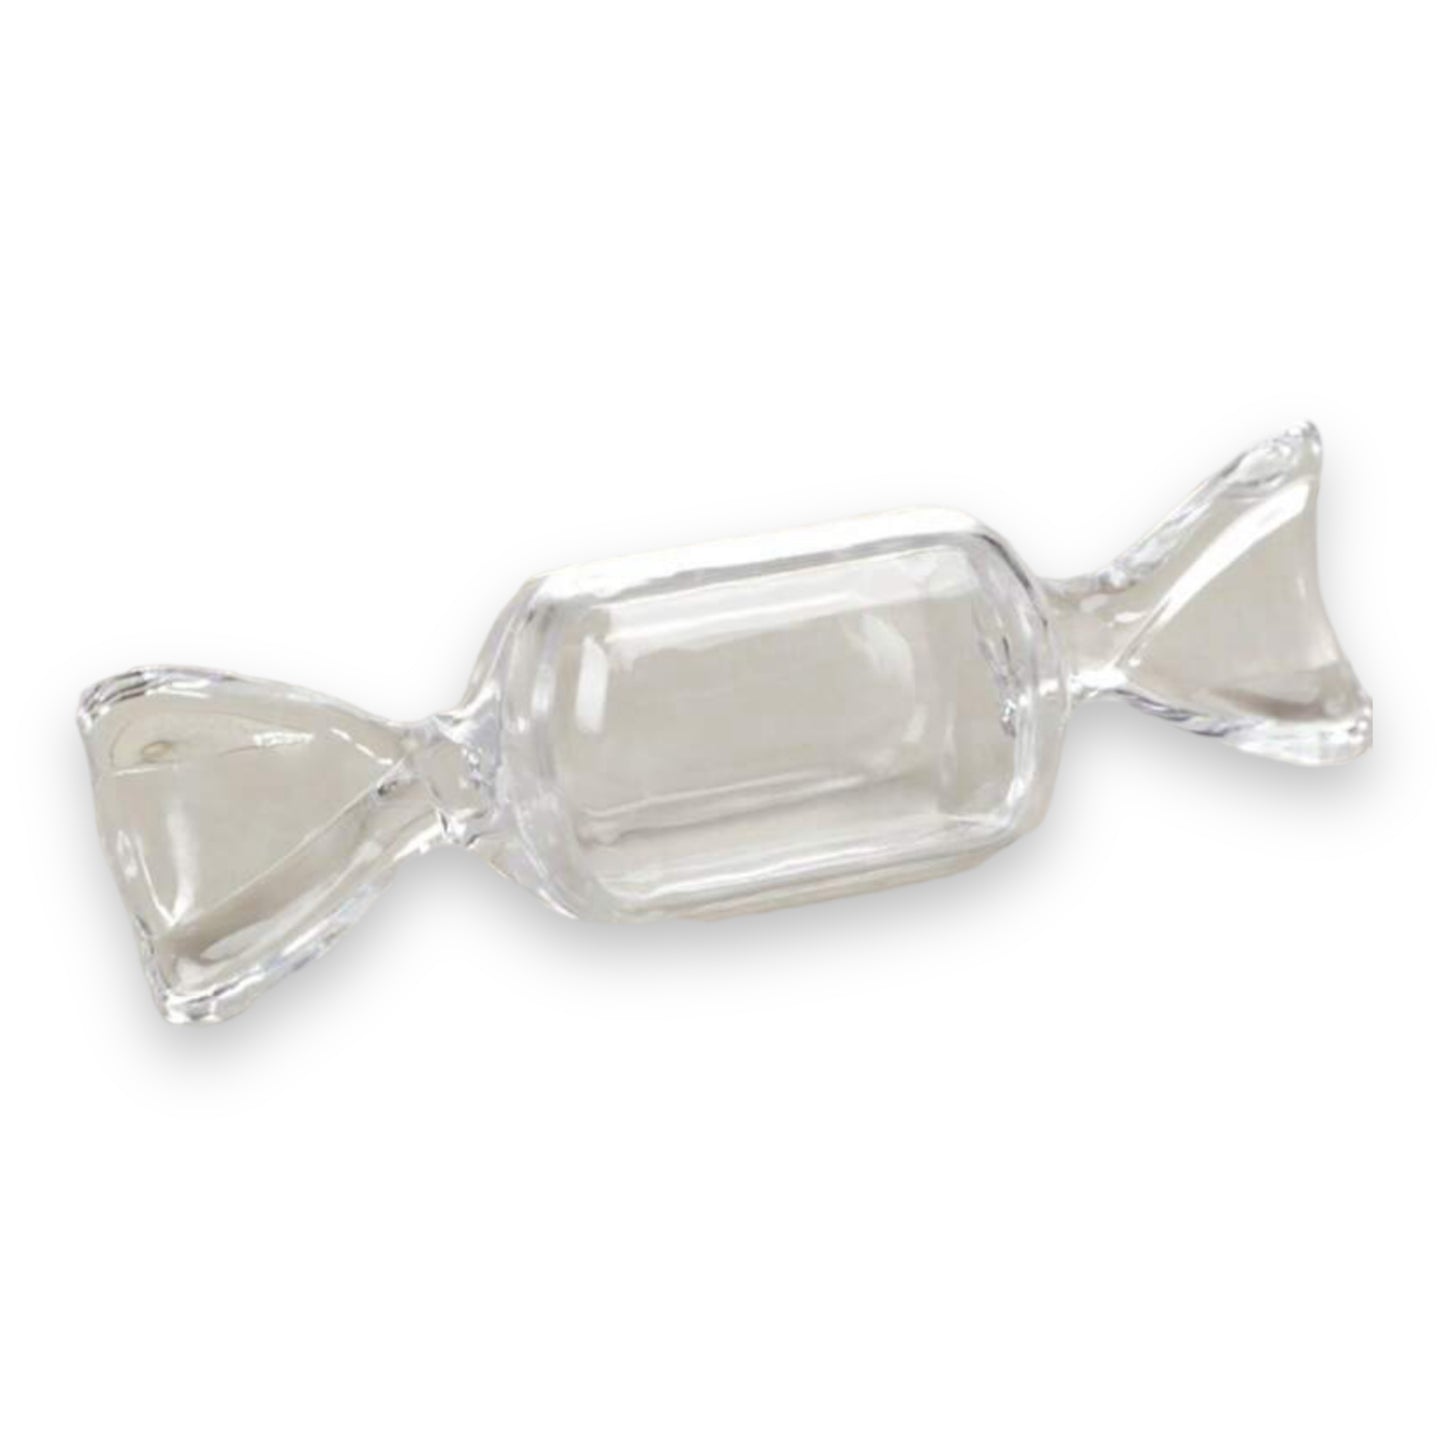 Timmy Toys - S009 - Mini Plastic Box Candy - Clear - 1 Piece